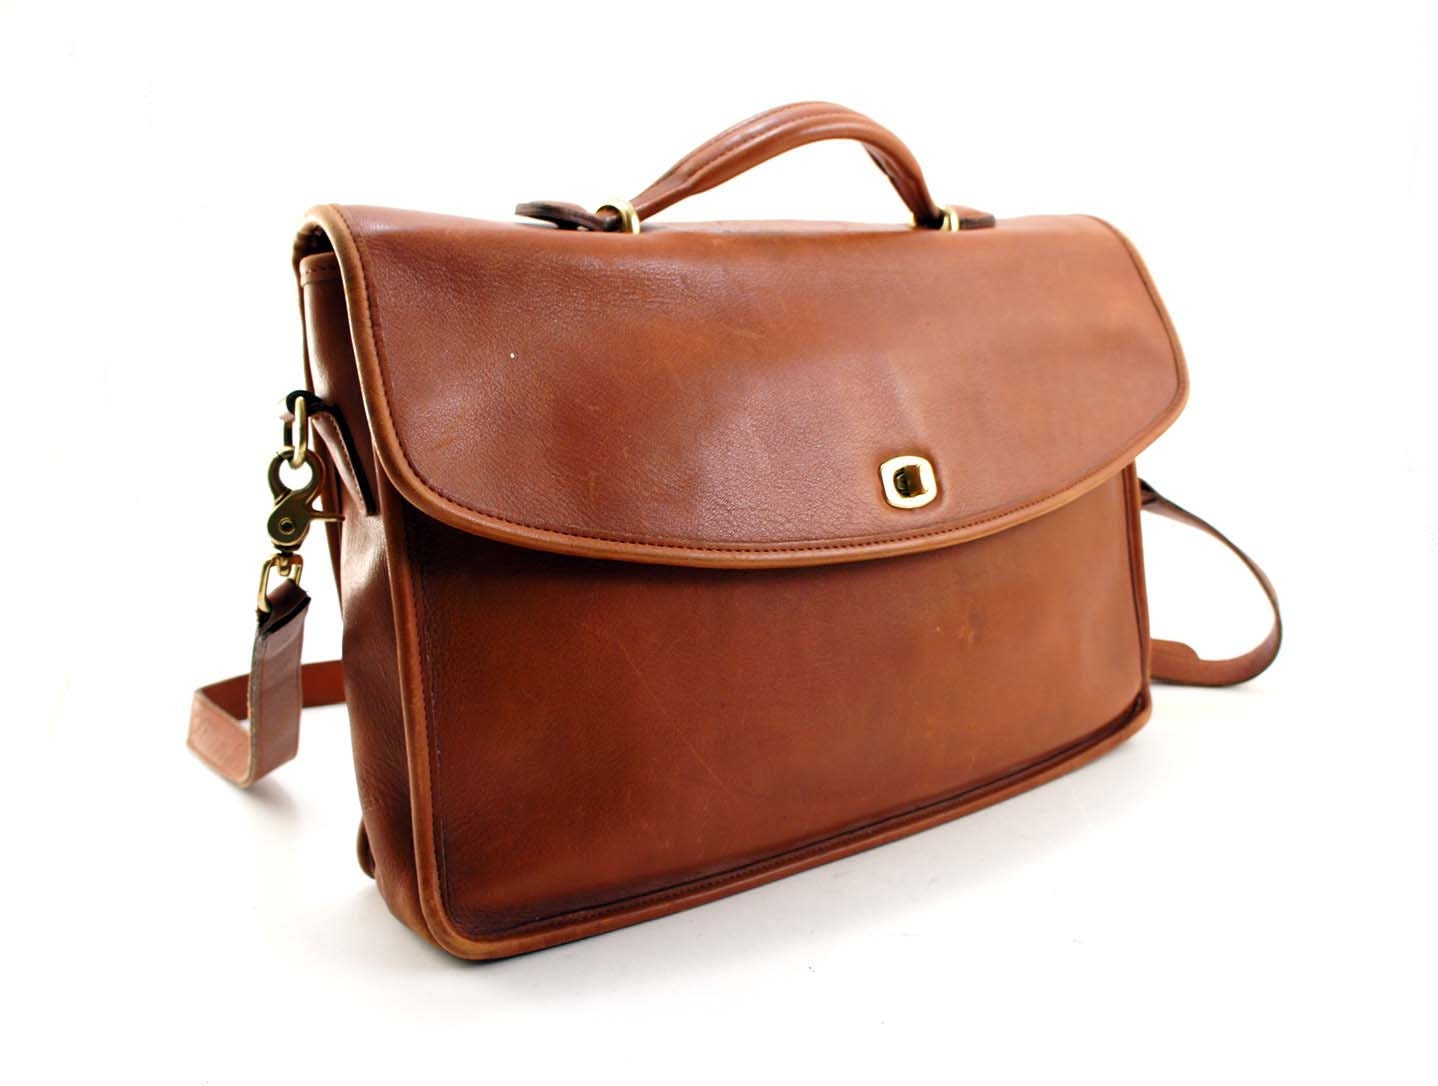 Coach Messenger Bag / Laptop Bag in Brown Leather by NashDryGoods